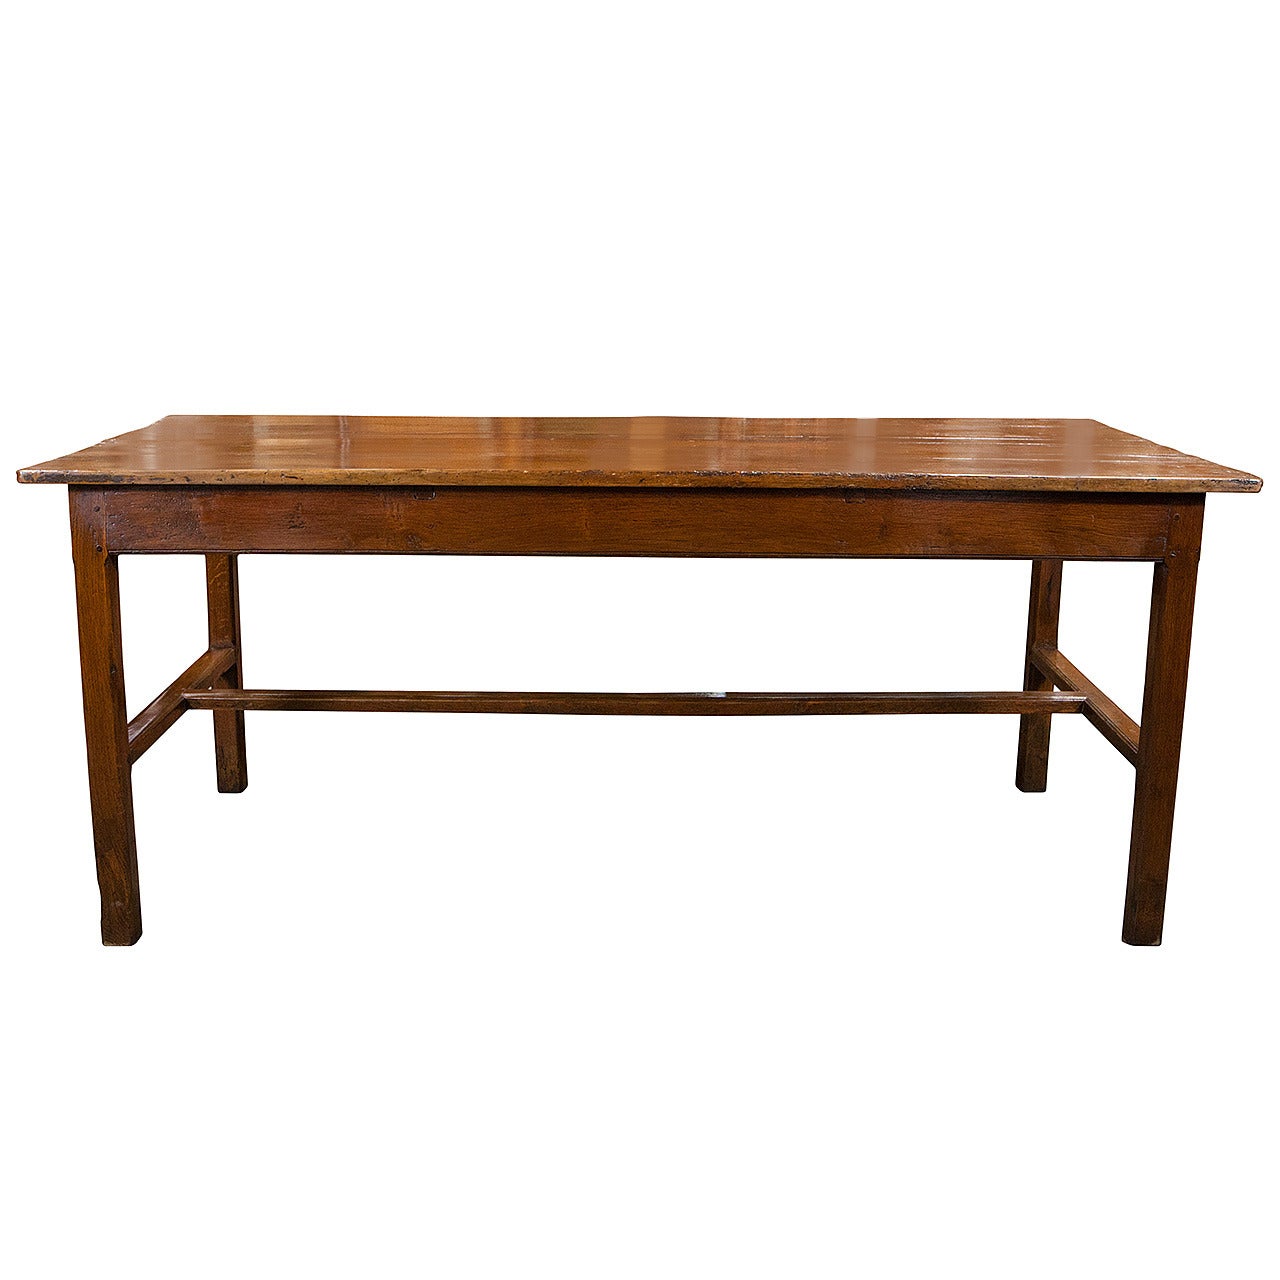 French Fruitwood Farm Table